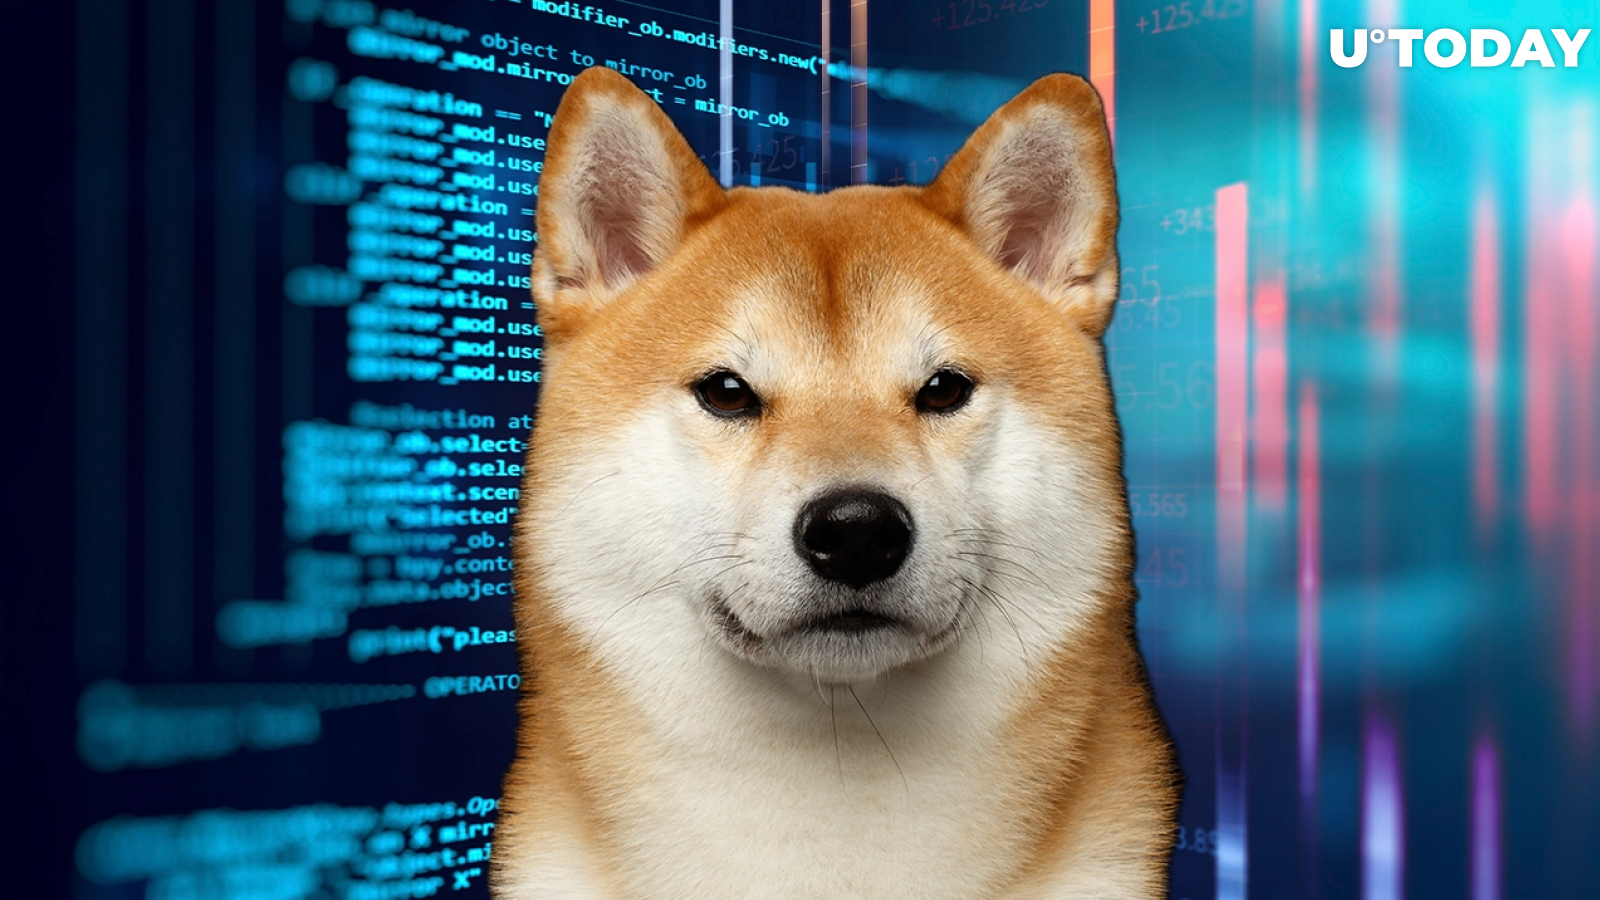 Darknet Use of Dogecoin on the Rise